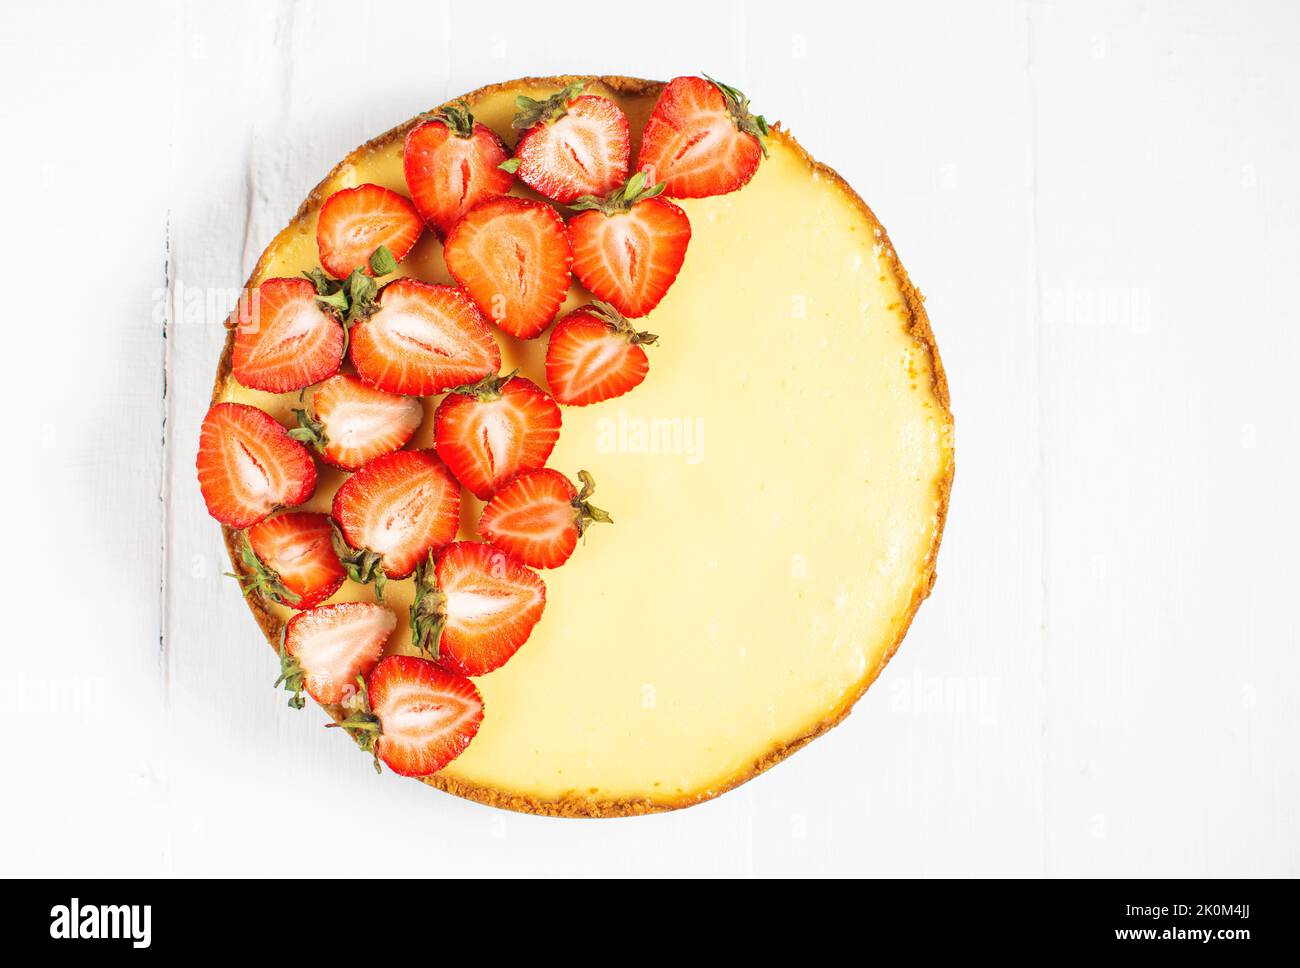 Sweet breakfast, delicious cheesecake with fresh strawberries, homemade recipe on white wooden table. Top view Stock Photo